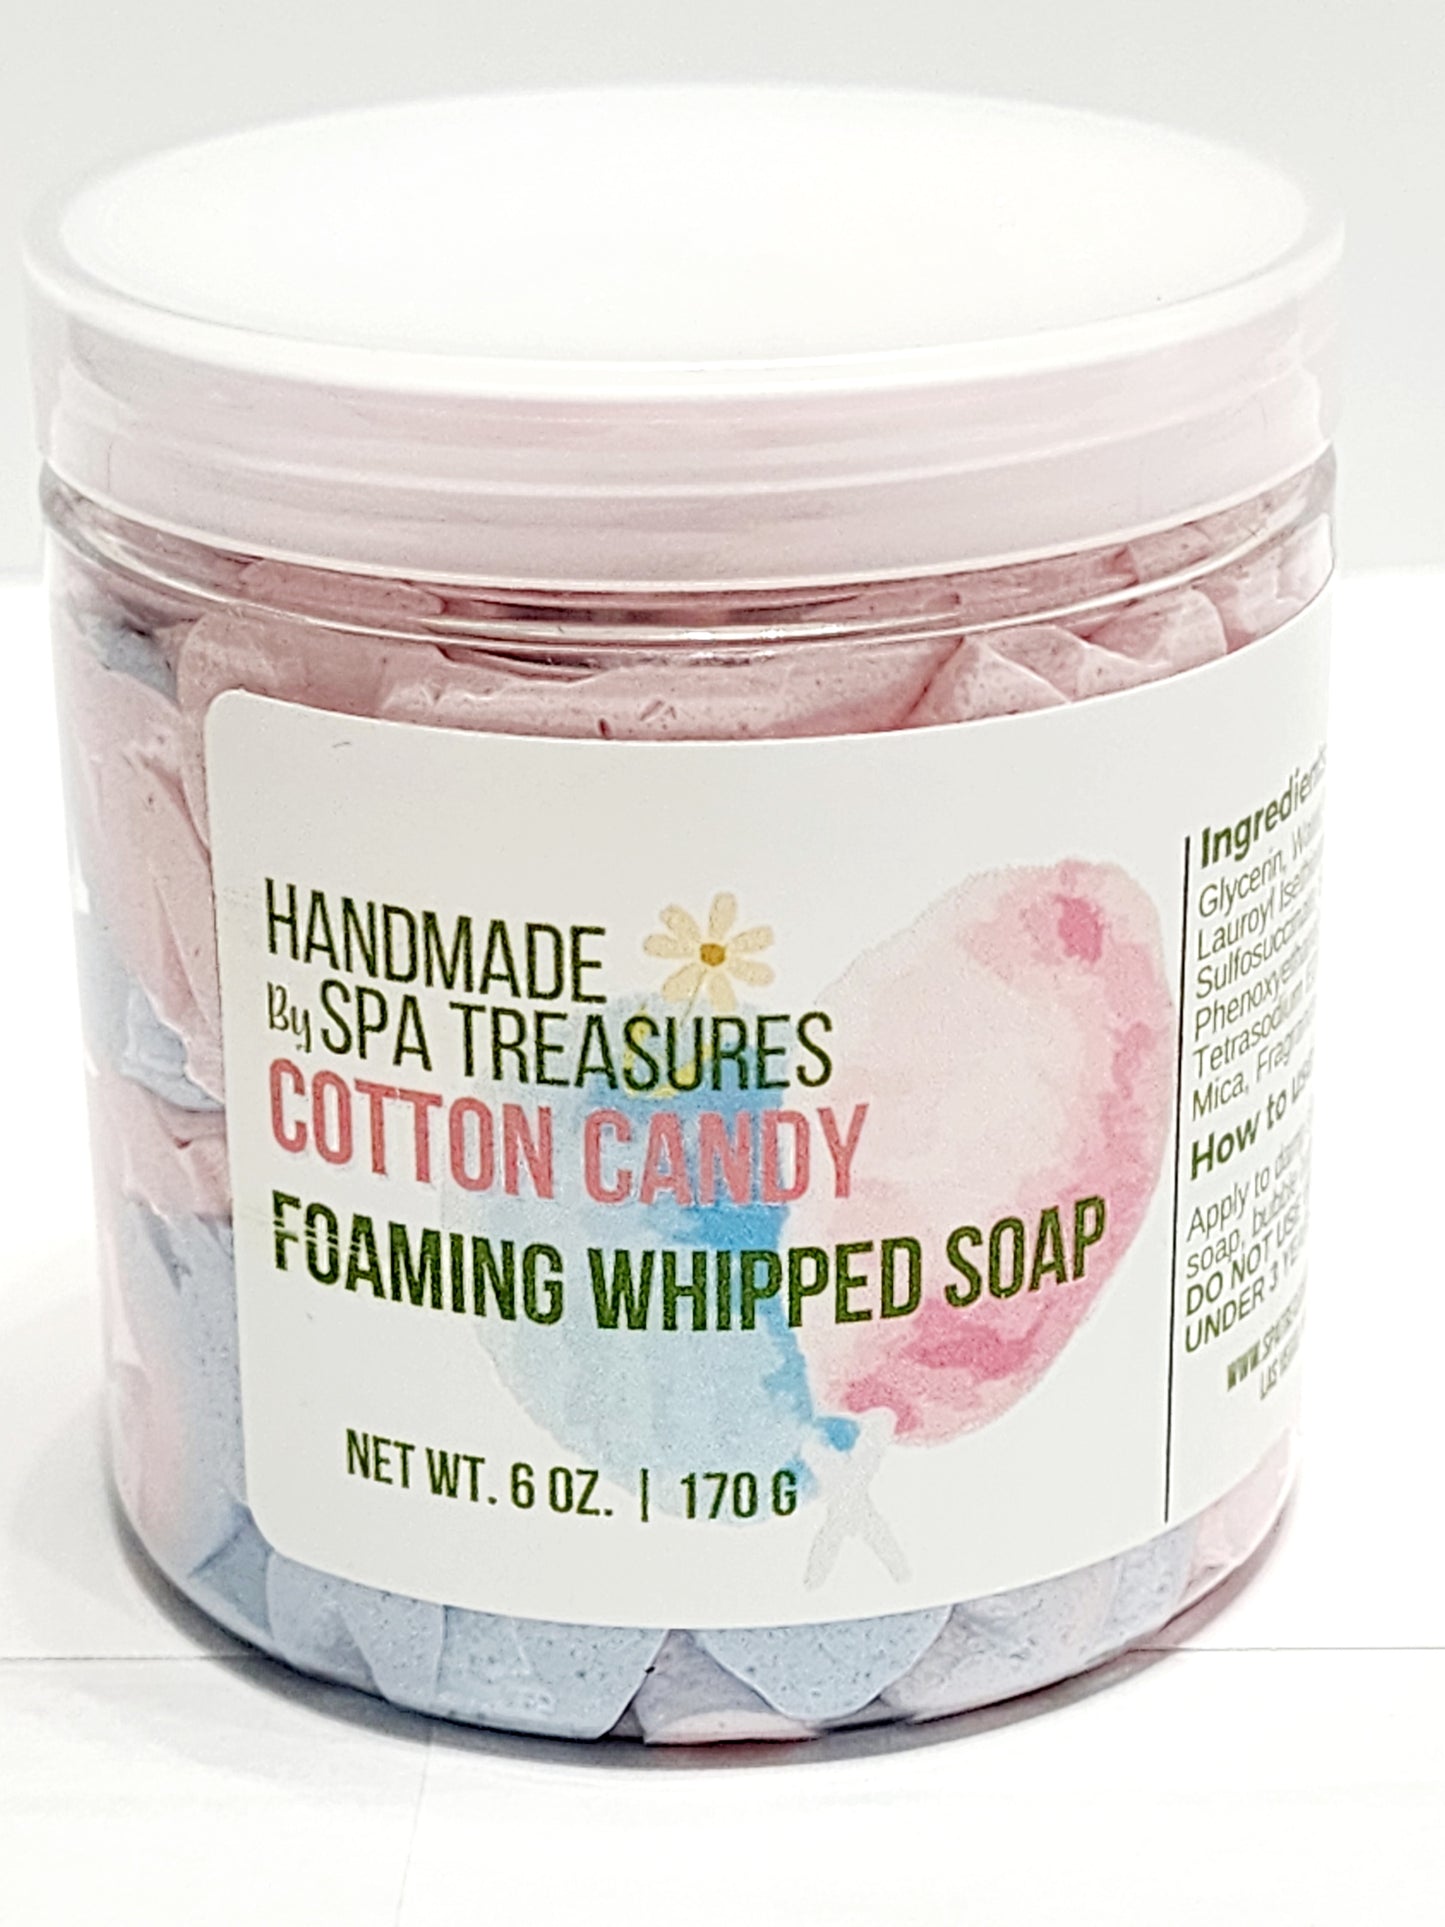 Whipped Soap (Limited Editions)